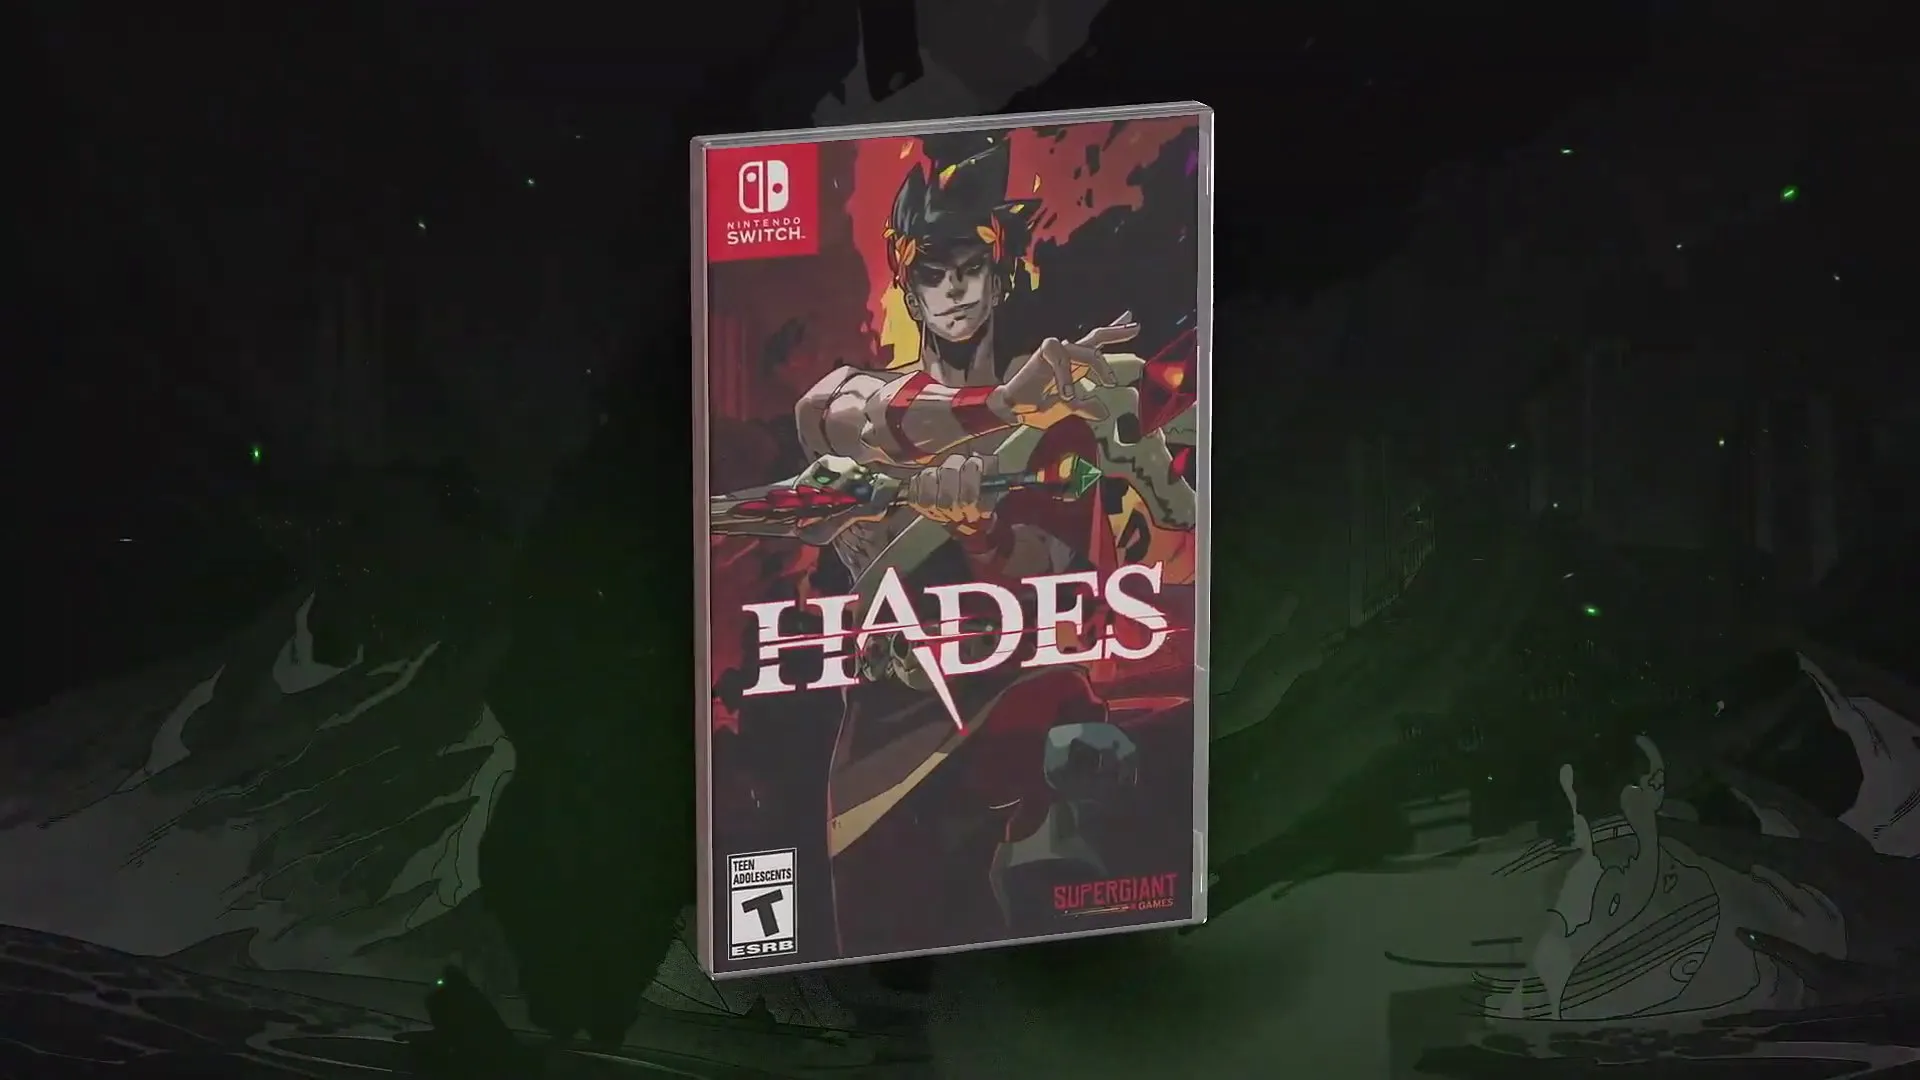 https://www.siliconera.com/wp-content/uploads/2021/02/hades-switch-physical.jpg